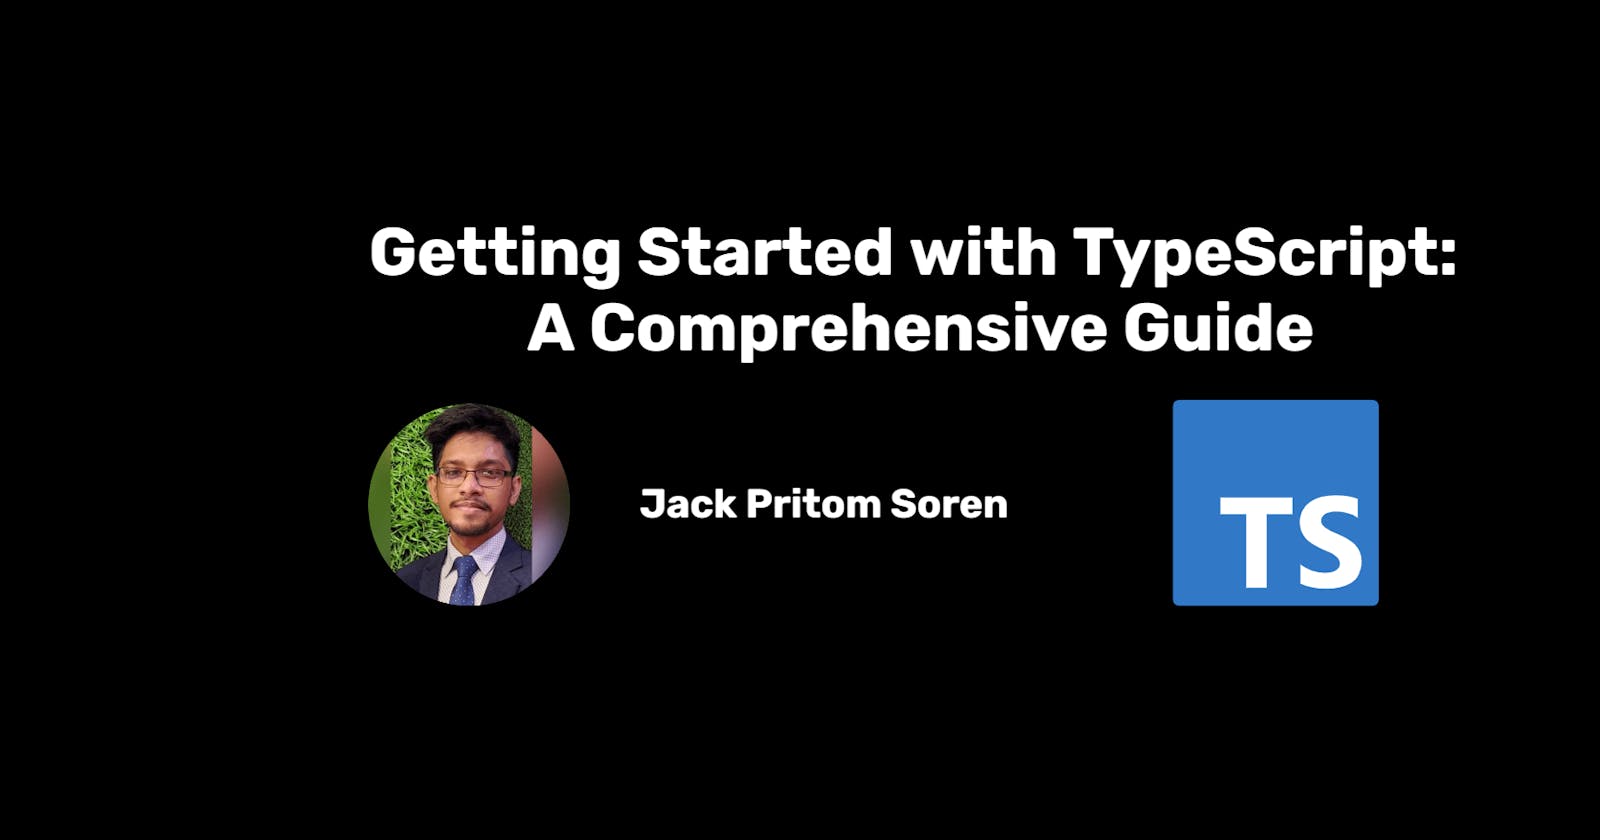 Getting Started with TypeScript: A Comprehensive Guide